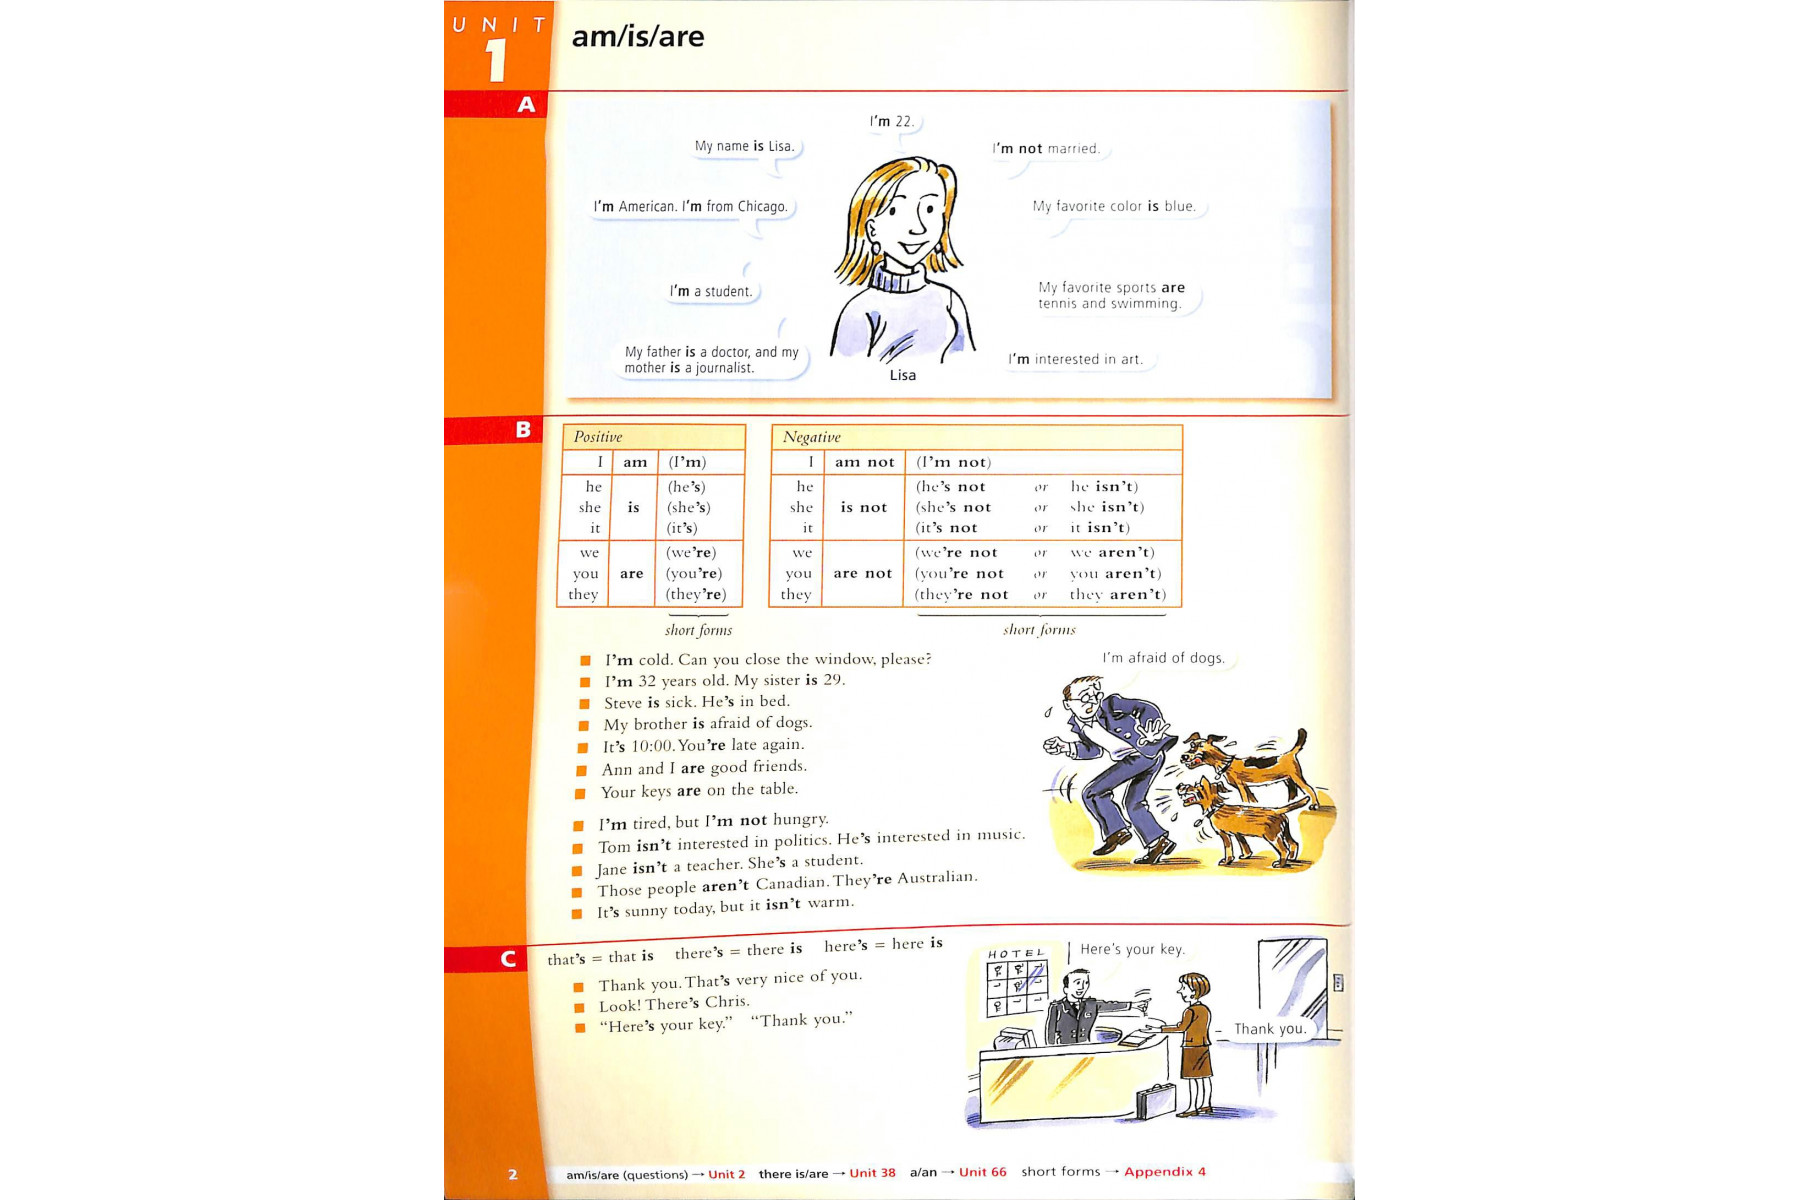 Basic Grammar in Use Student's Book with Answers and CD-ROM